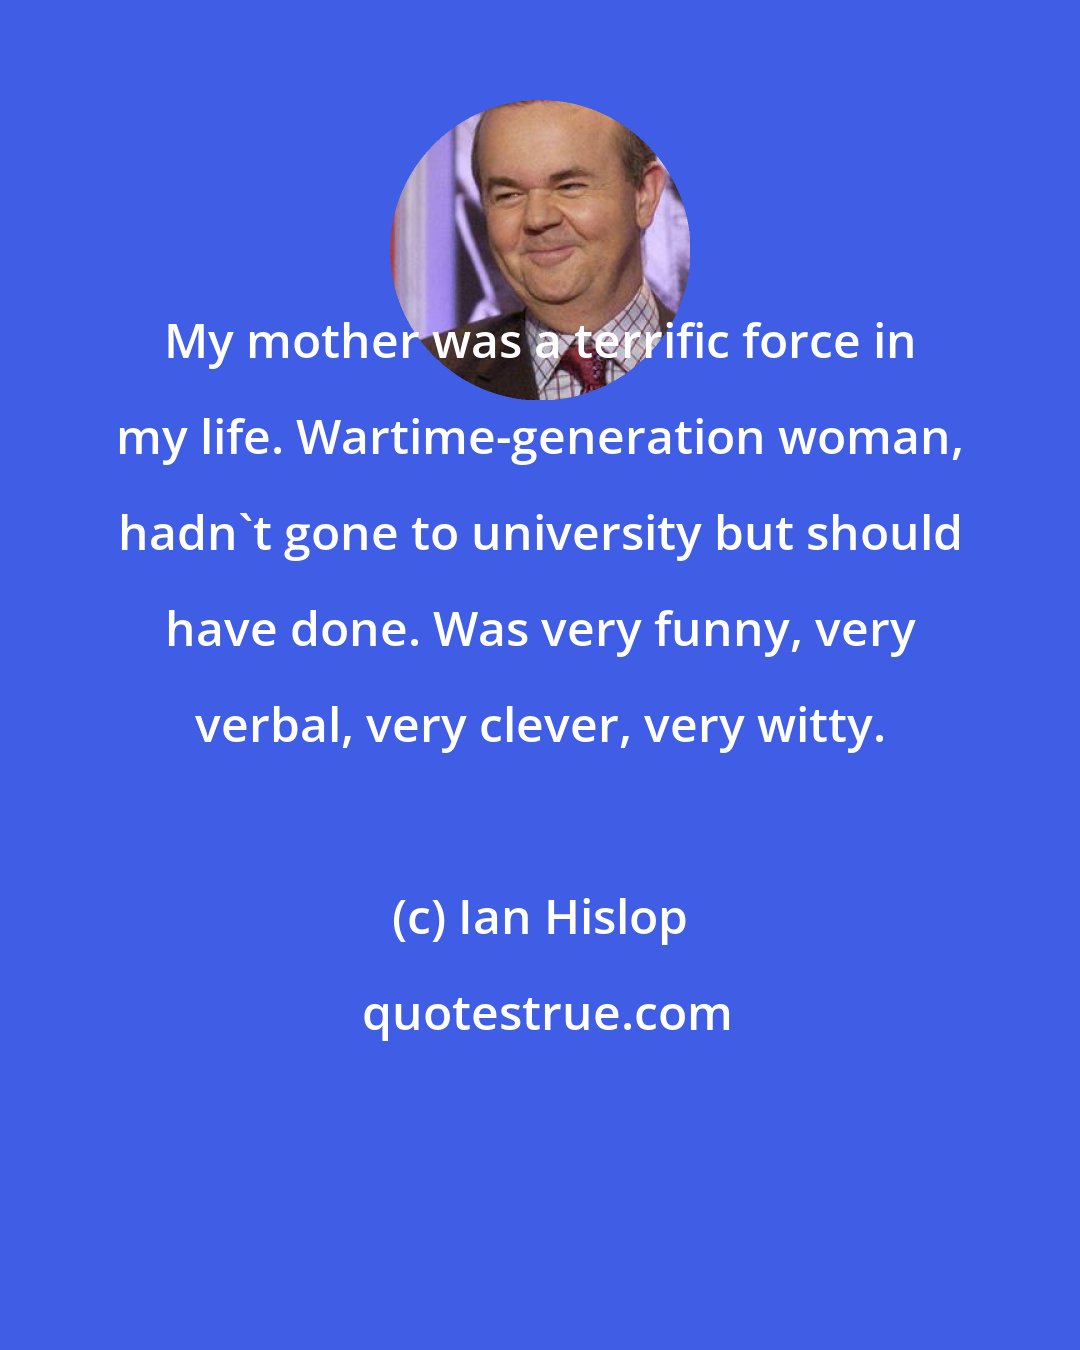 Ian Hislop: My mother was a terrific force in my life. Wartime-generation woman, hadn't gone to university but should have done. Was very funny, very verbal, very clever, very witty.